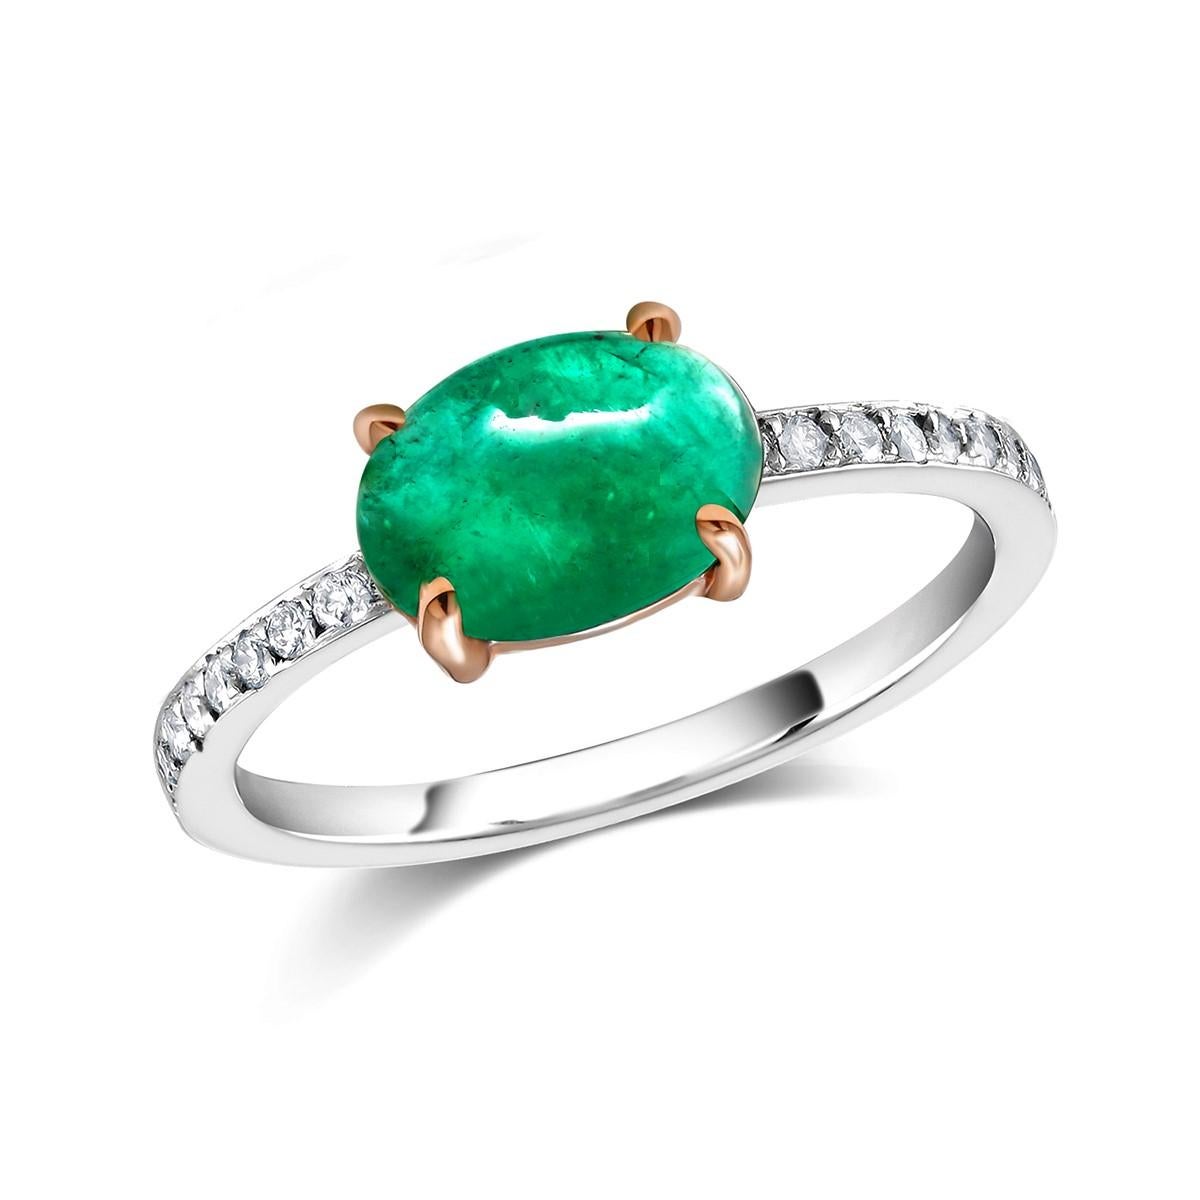 14 karats white and yellow gold cabochon emerald and diamond ring
Cabochon emerald weighing 1.85 carat 
Diamond weighing 0.23      
Emerald measuring 9x7 millimeter
One of a kind ring                                                               